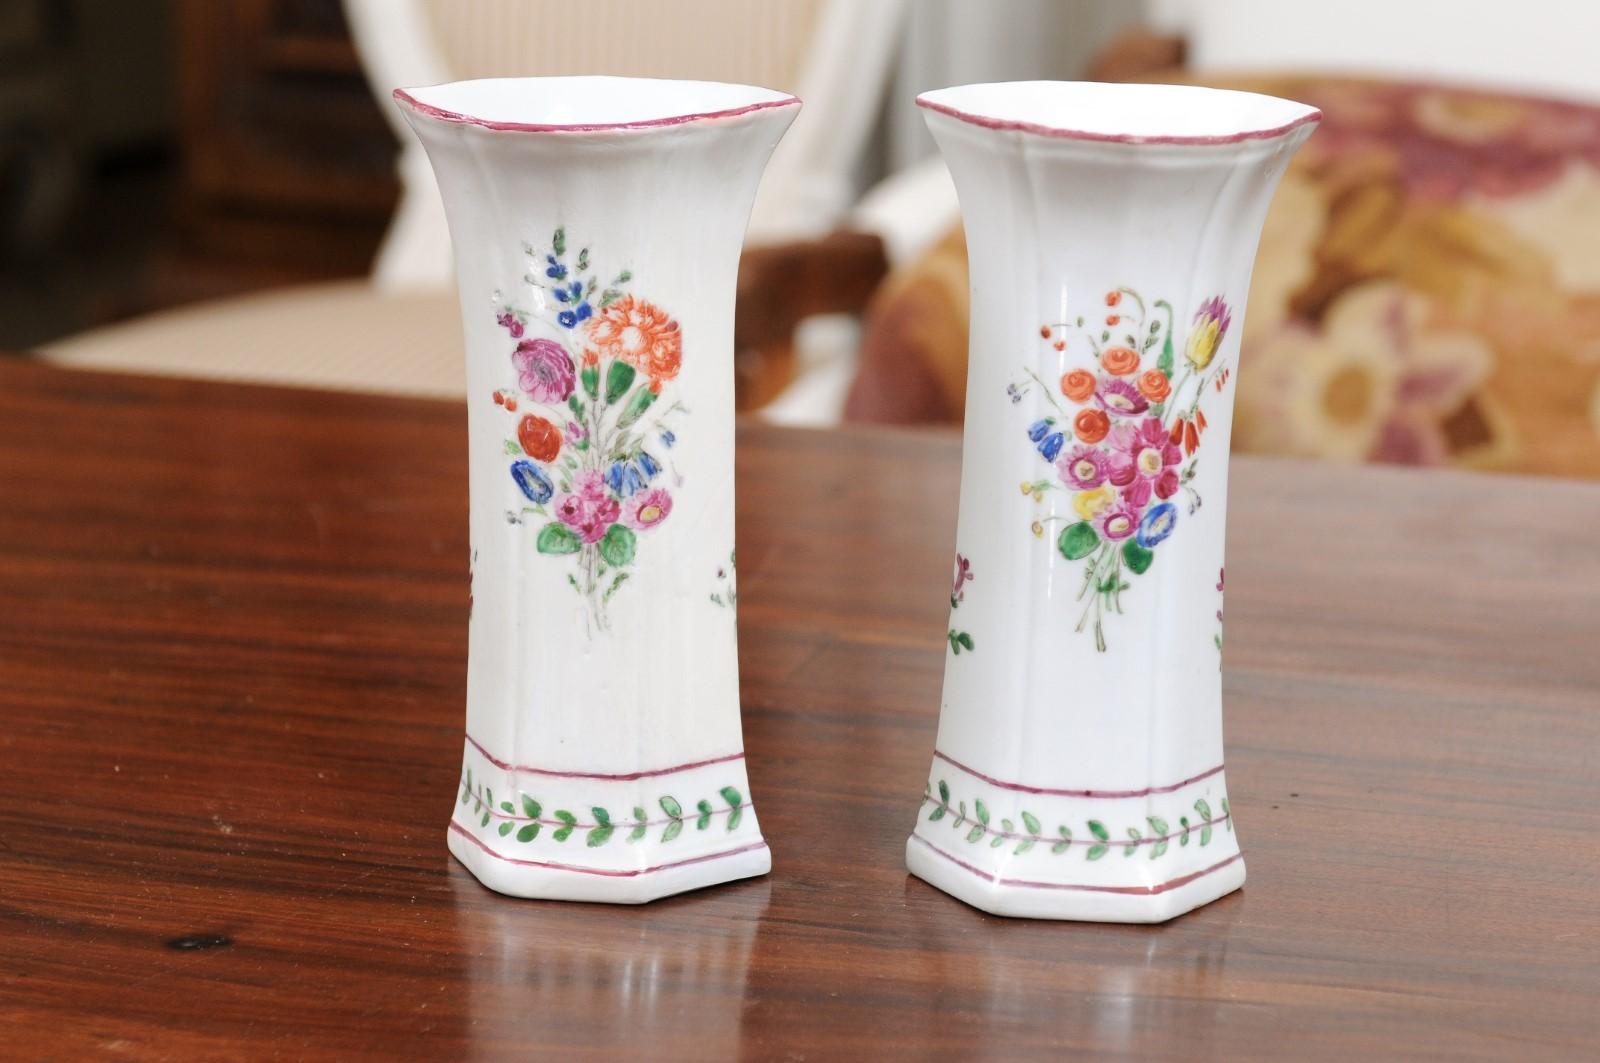 Pair of Italian Porcelain Vases with Colorful Painted Floral Motifs, circa 1805 For Sale 2